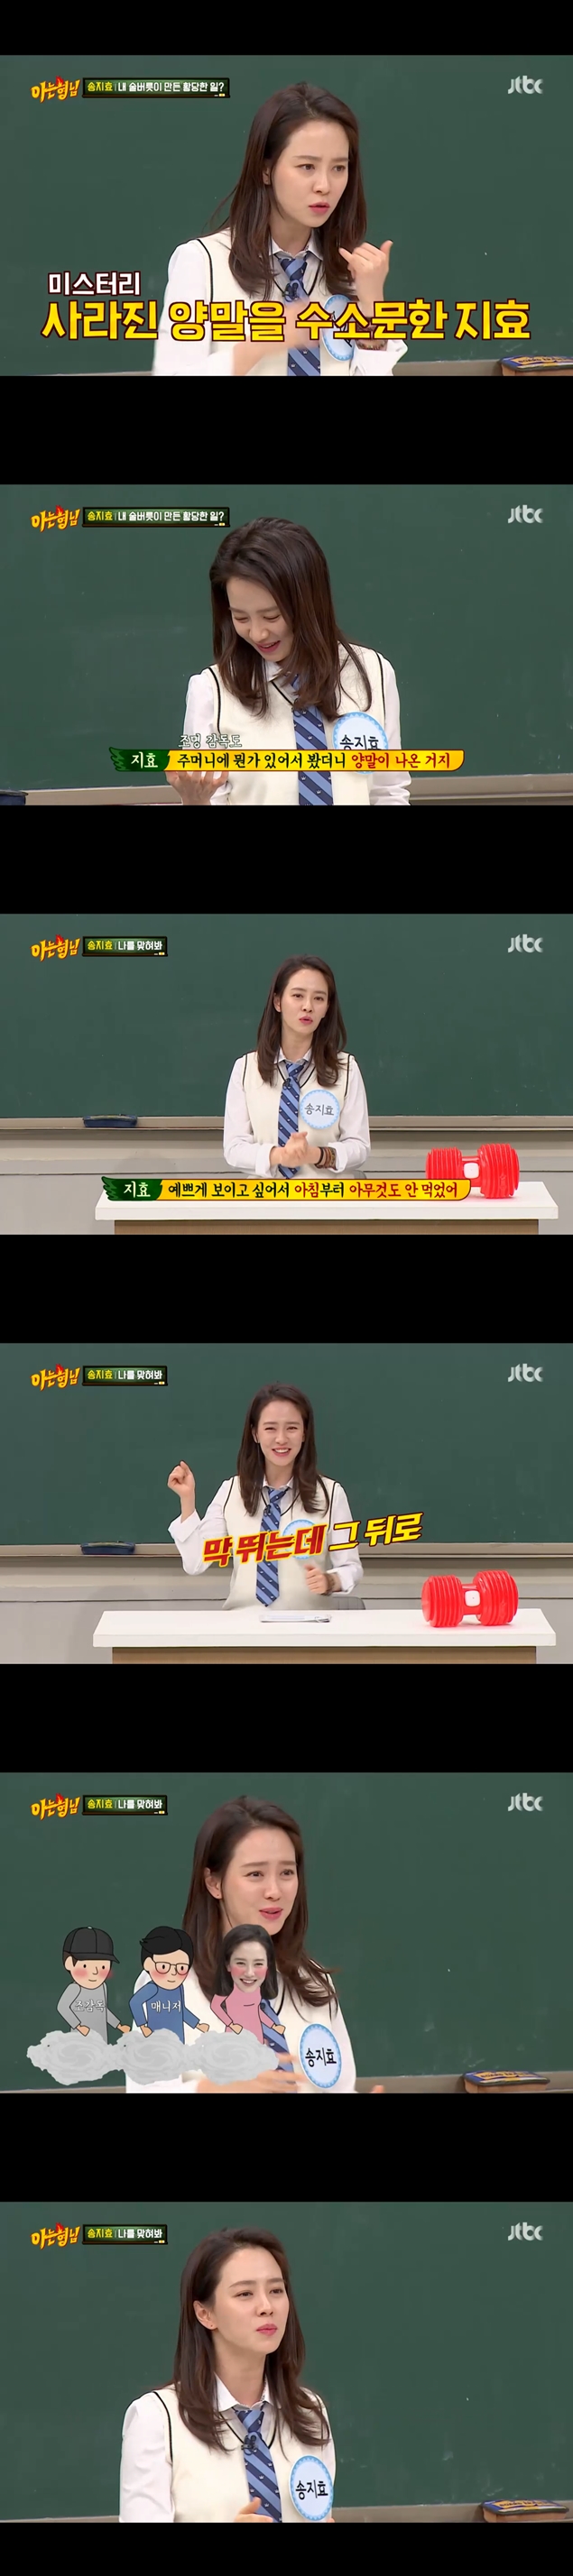 Song Ji-hyo reveals his drinking habit of running when drunkJTBC entertainment program Knowing Bros (hereinafter Knowing Bros), which was broadcast on the afternoon of the 14th, depicted the performances of Song Ji-hyo and Kim Moo-yeol who transferred from the school to be familiar here.Song Ji-hyo took off his socks and revealed his drinking habits in the padding of the lighting director. I have a habit of taking off my socks when I drink, he said.I took off my socks and put them in the padding of the lighting director. The next day, the lighting director gave me the washing, he said. I was so sorry and thanked you.Song Ji-hyo was lucky to say, I had a meeting with actors, I didnt even eat because I wanted to look pretty.I did not eat rice and drank alcohol, but I was drunk, he said. I opened my eyes and I saw Model Behavior at home.Song Ji-hyo said, I went to buy chicken the next day, and the boss said, You do not run today.I ate kimchi with my hand because I was hungry while eating pretty, he said, revealing the story of the kimchi soup.Meanwhile, Knowing Bros is an entertainment program that aims to play all the worlds games in the school of reason, loss, instinct and faithful brother.It airs every Saturday at 9 p.m.